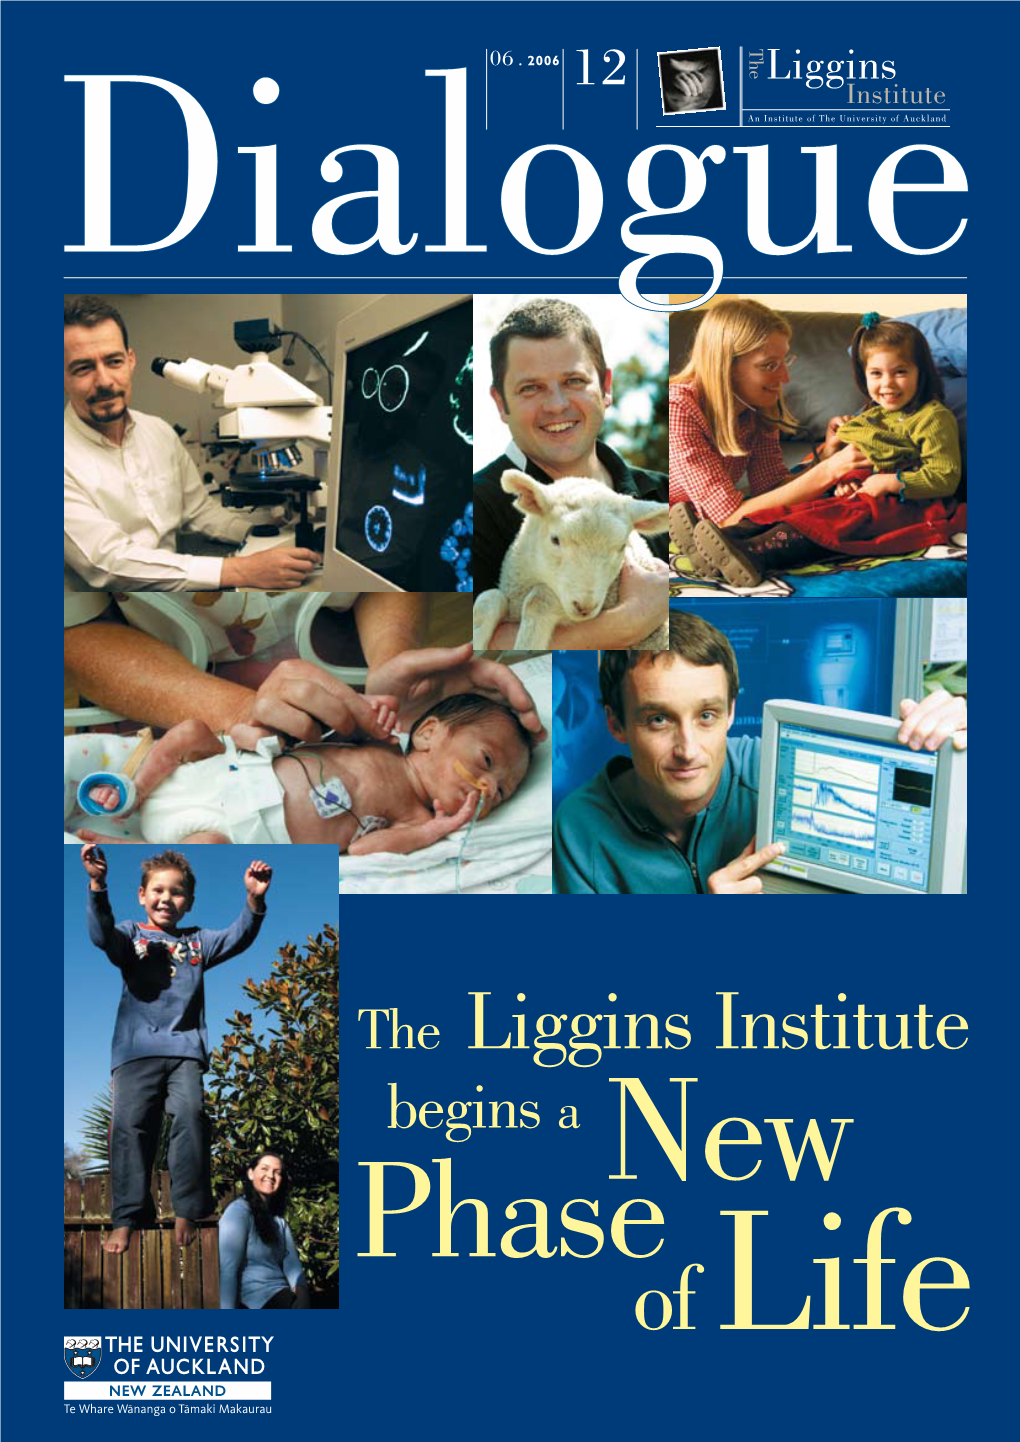 The Liggins Institute Begins a New Phase of Life